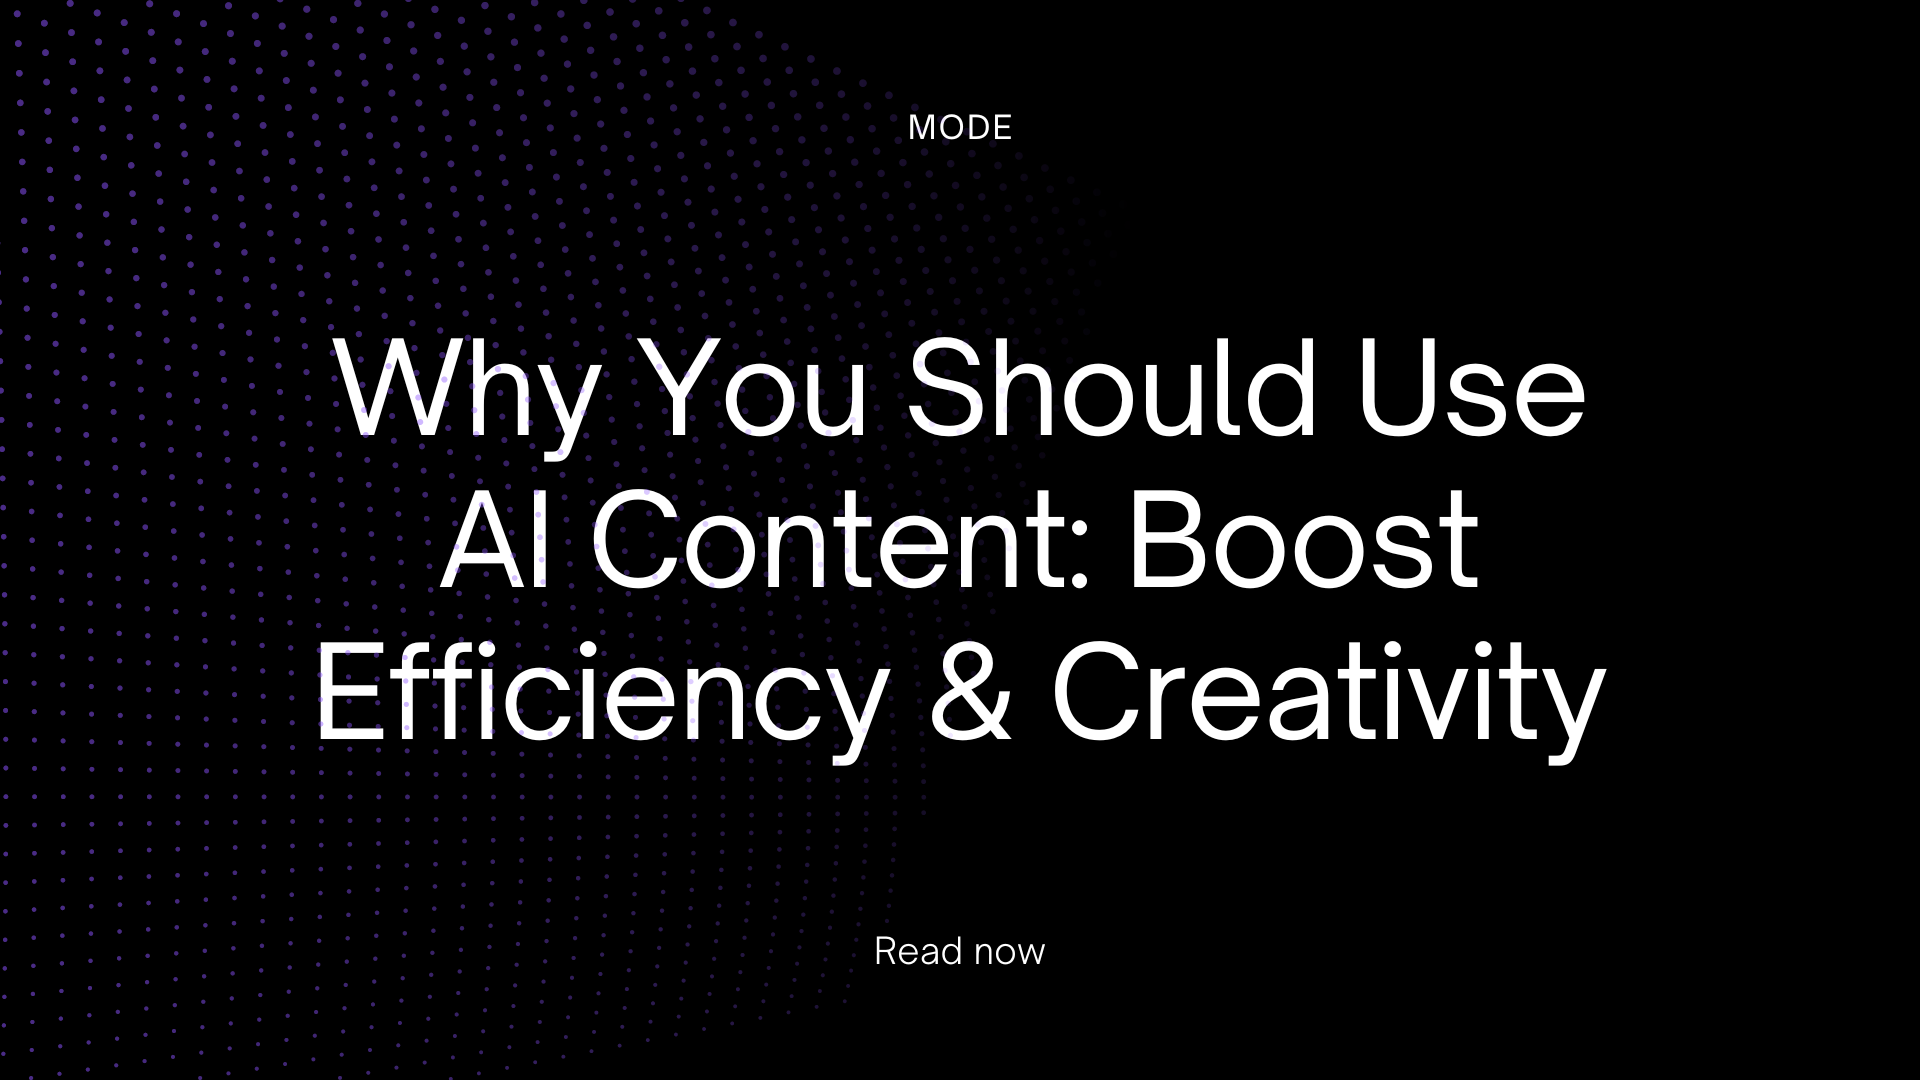 Why You Should Use AI Content: Boost Efficiency & Creativity